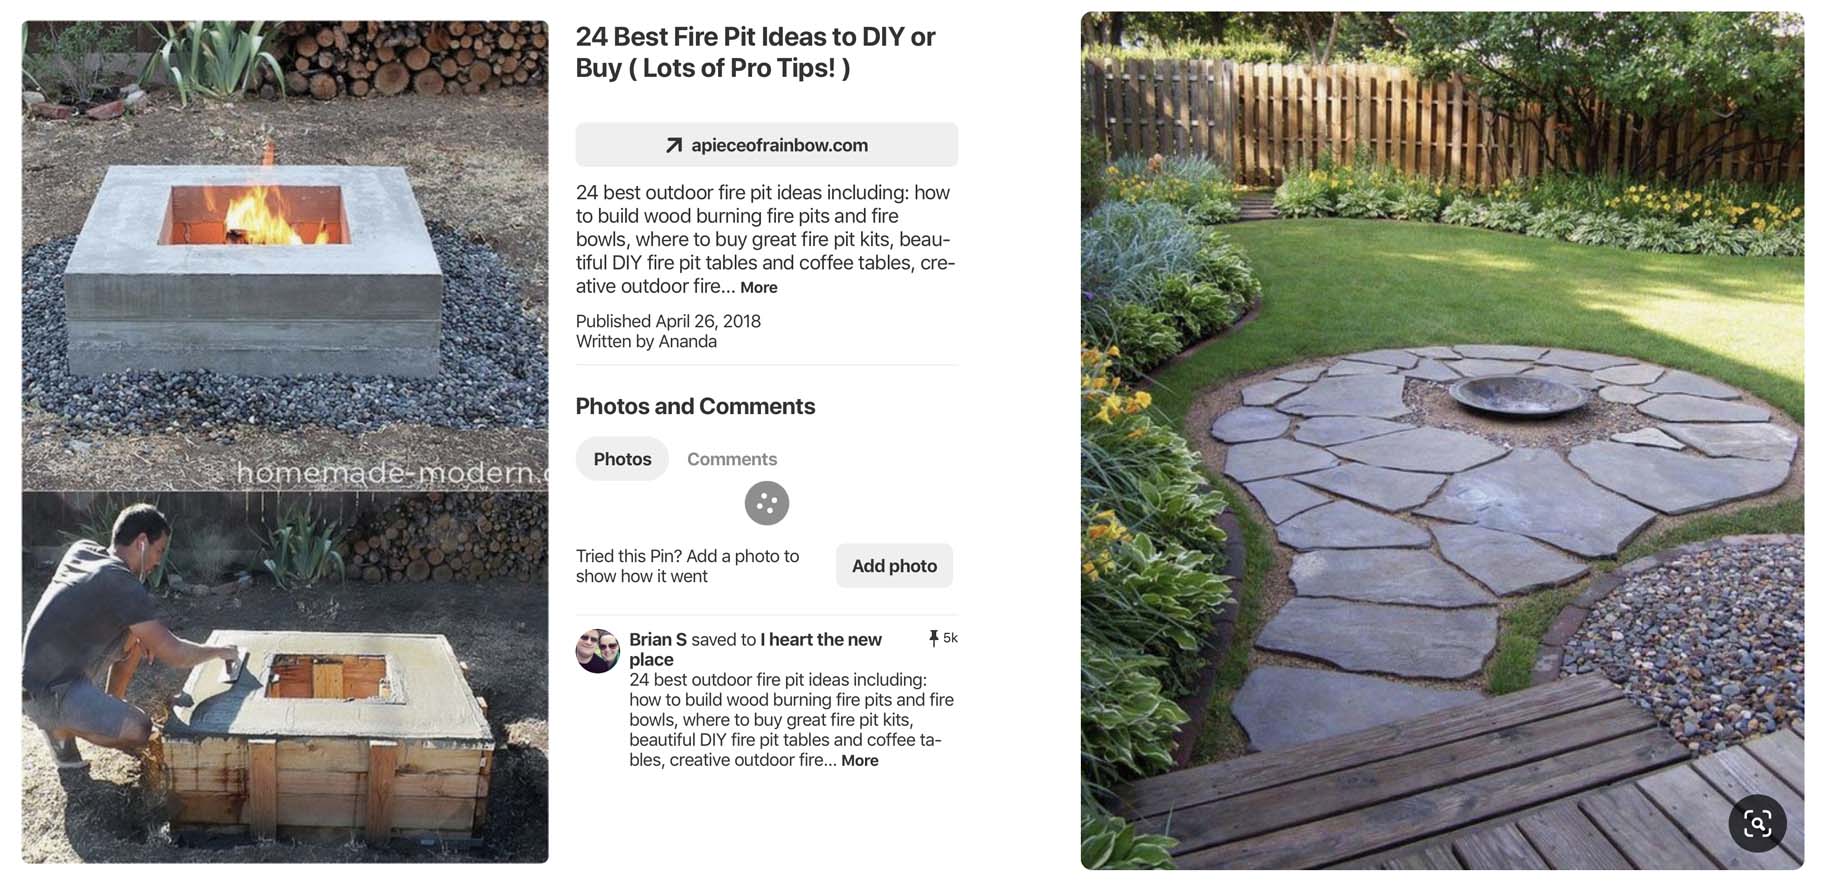 Ultimate Backyard Stone Fire Pit, How To Make A Square Fire Pit With Pavers